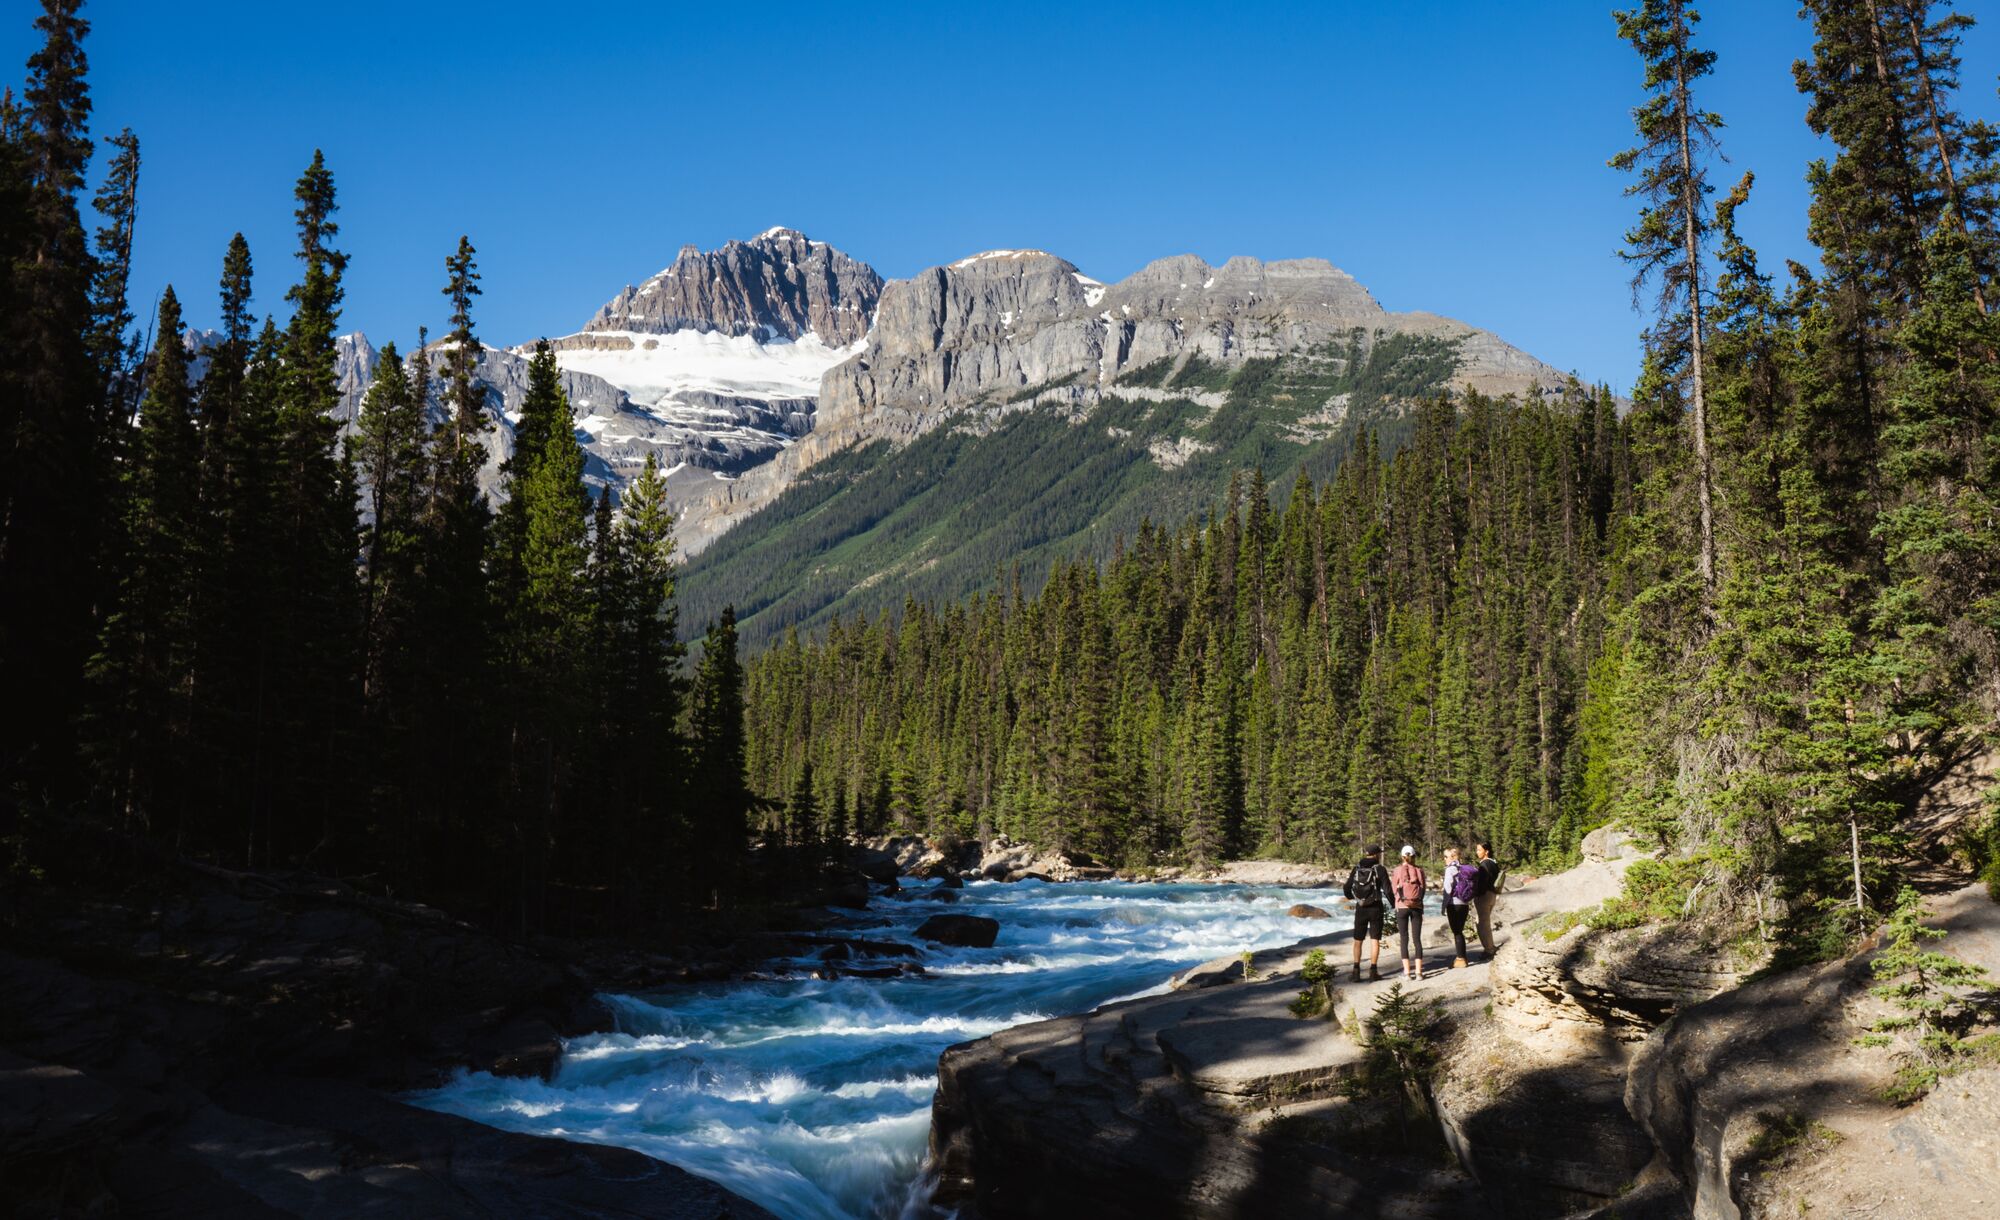 People stand overlooking the Mistaya Canyon waterfall on the Icefield Parkway in Banff National Park.